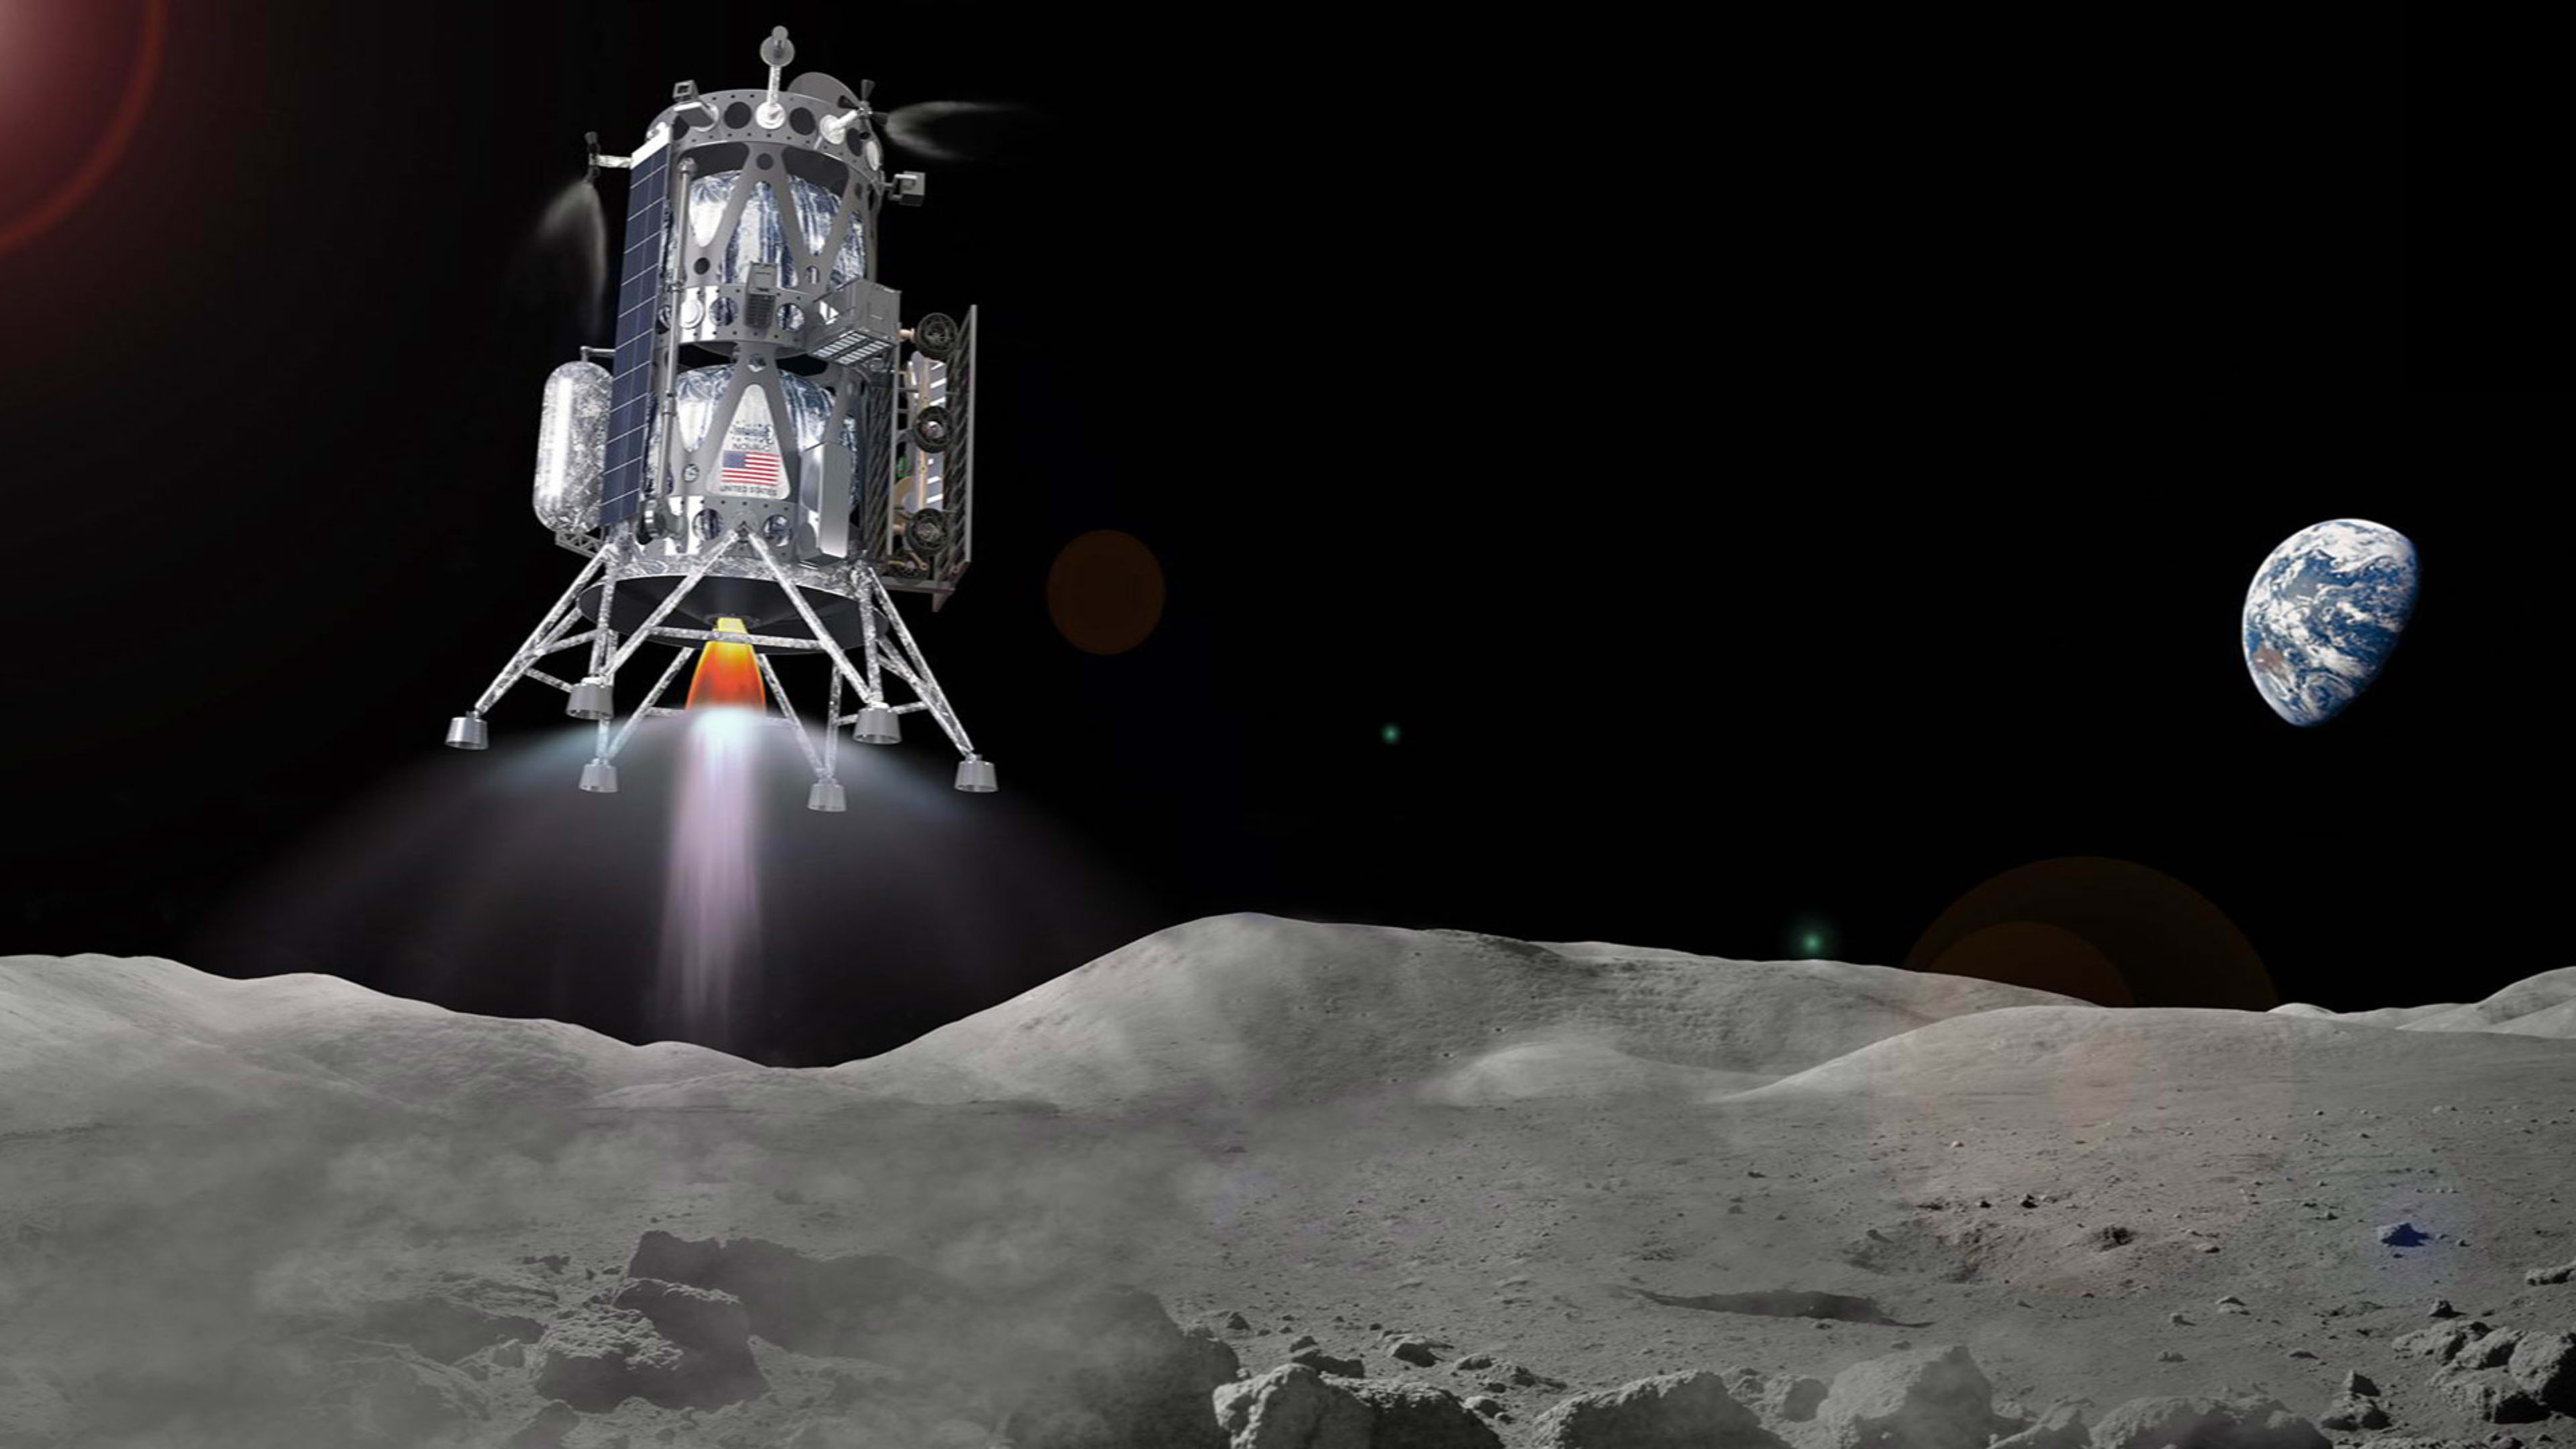 NASA will enlist these firms to return to the Moon at “unprecedented” speed